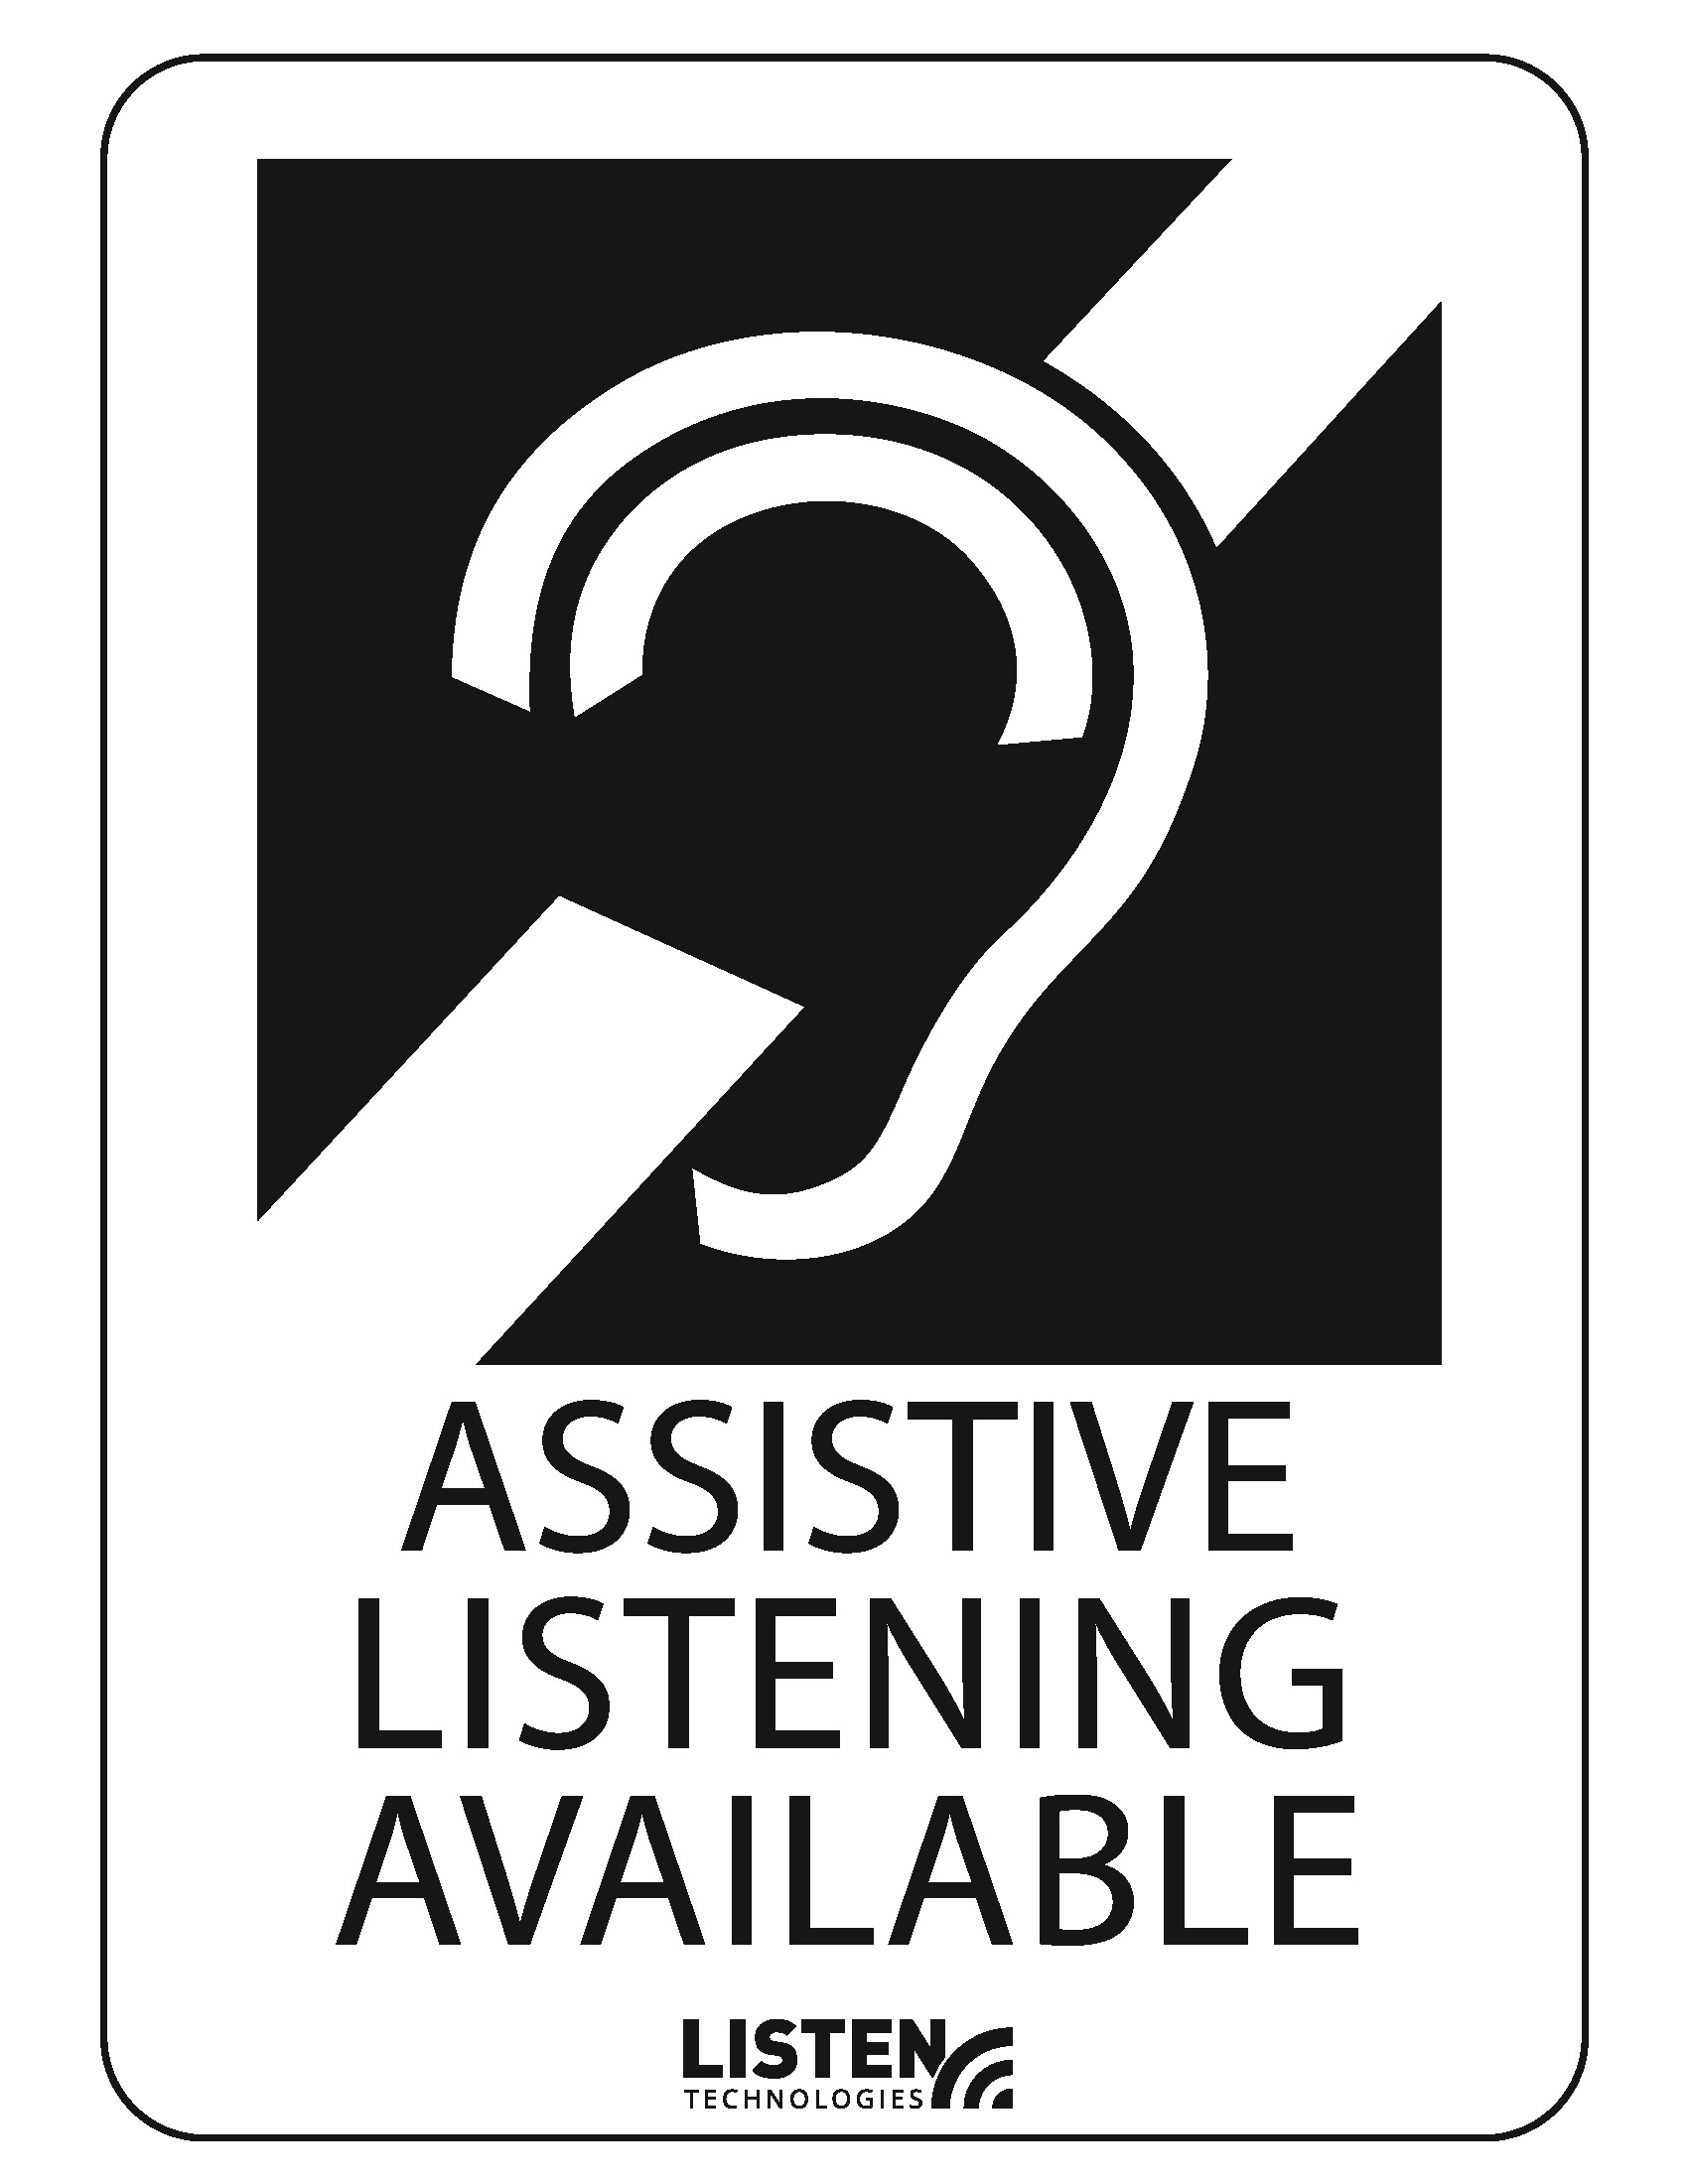 New assistive listening devices improve patron experience